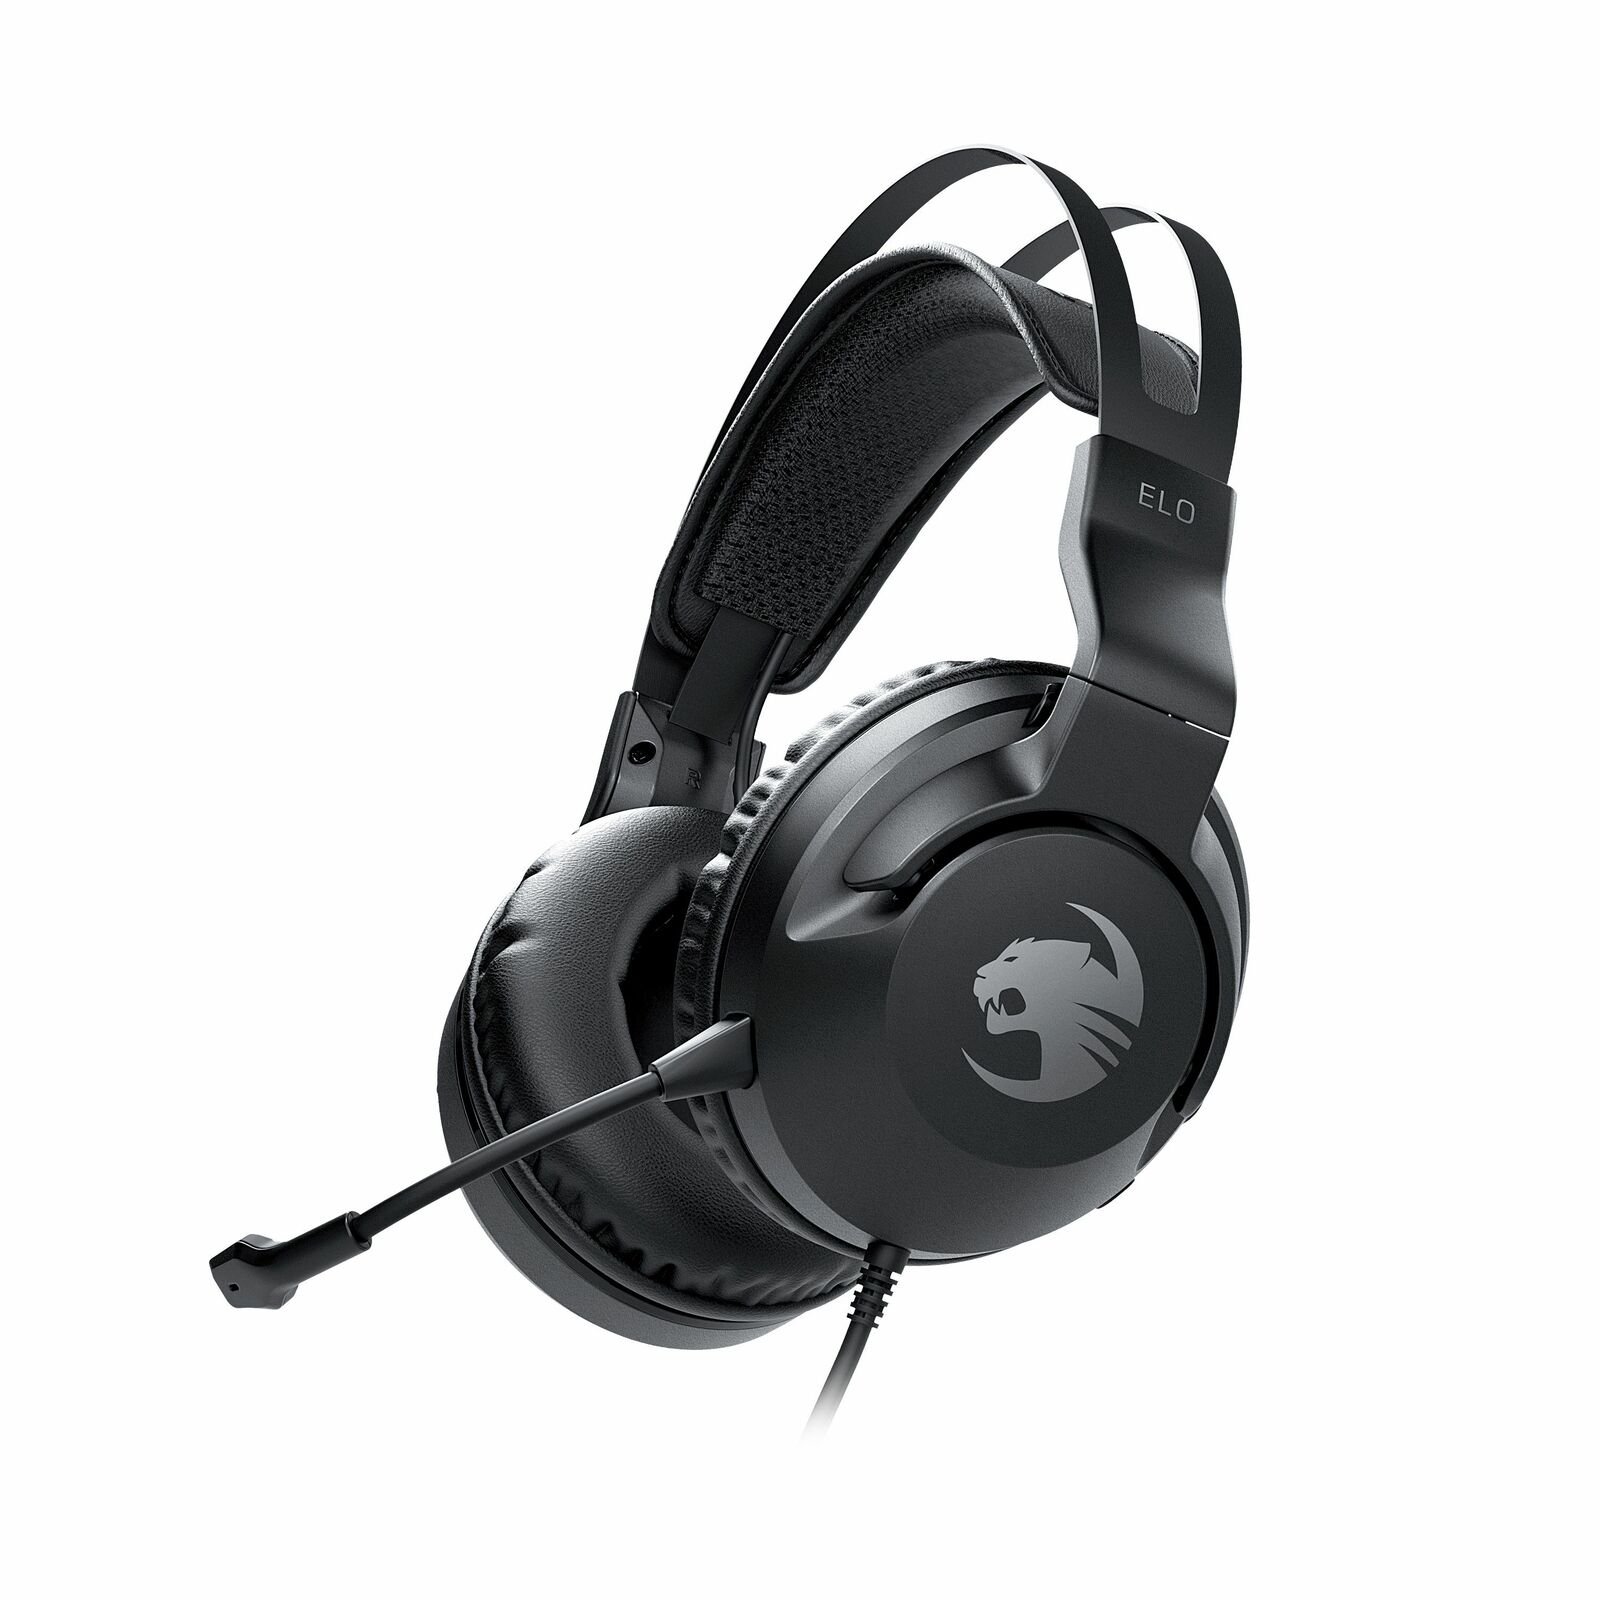 ROCCAT Elo X Wired PC Gaming Headset